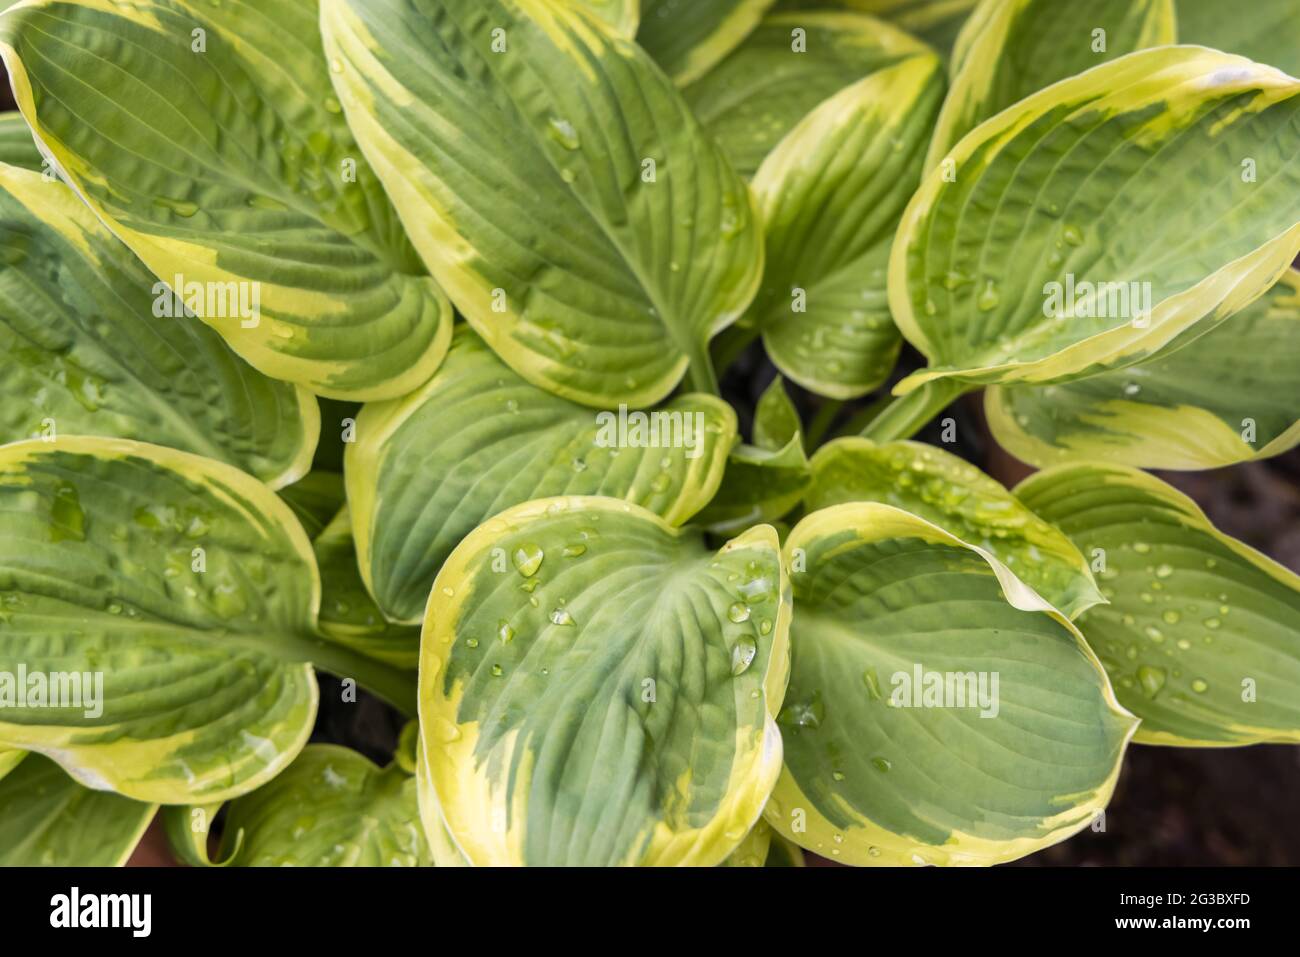 Raindrops on the green and yellow variegated leaves of a hosta plant growing in spring, Surrey, south-east England Stock Photo